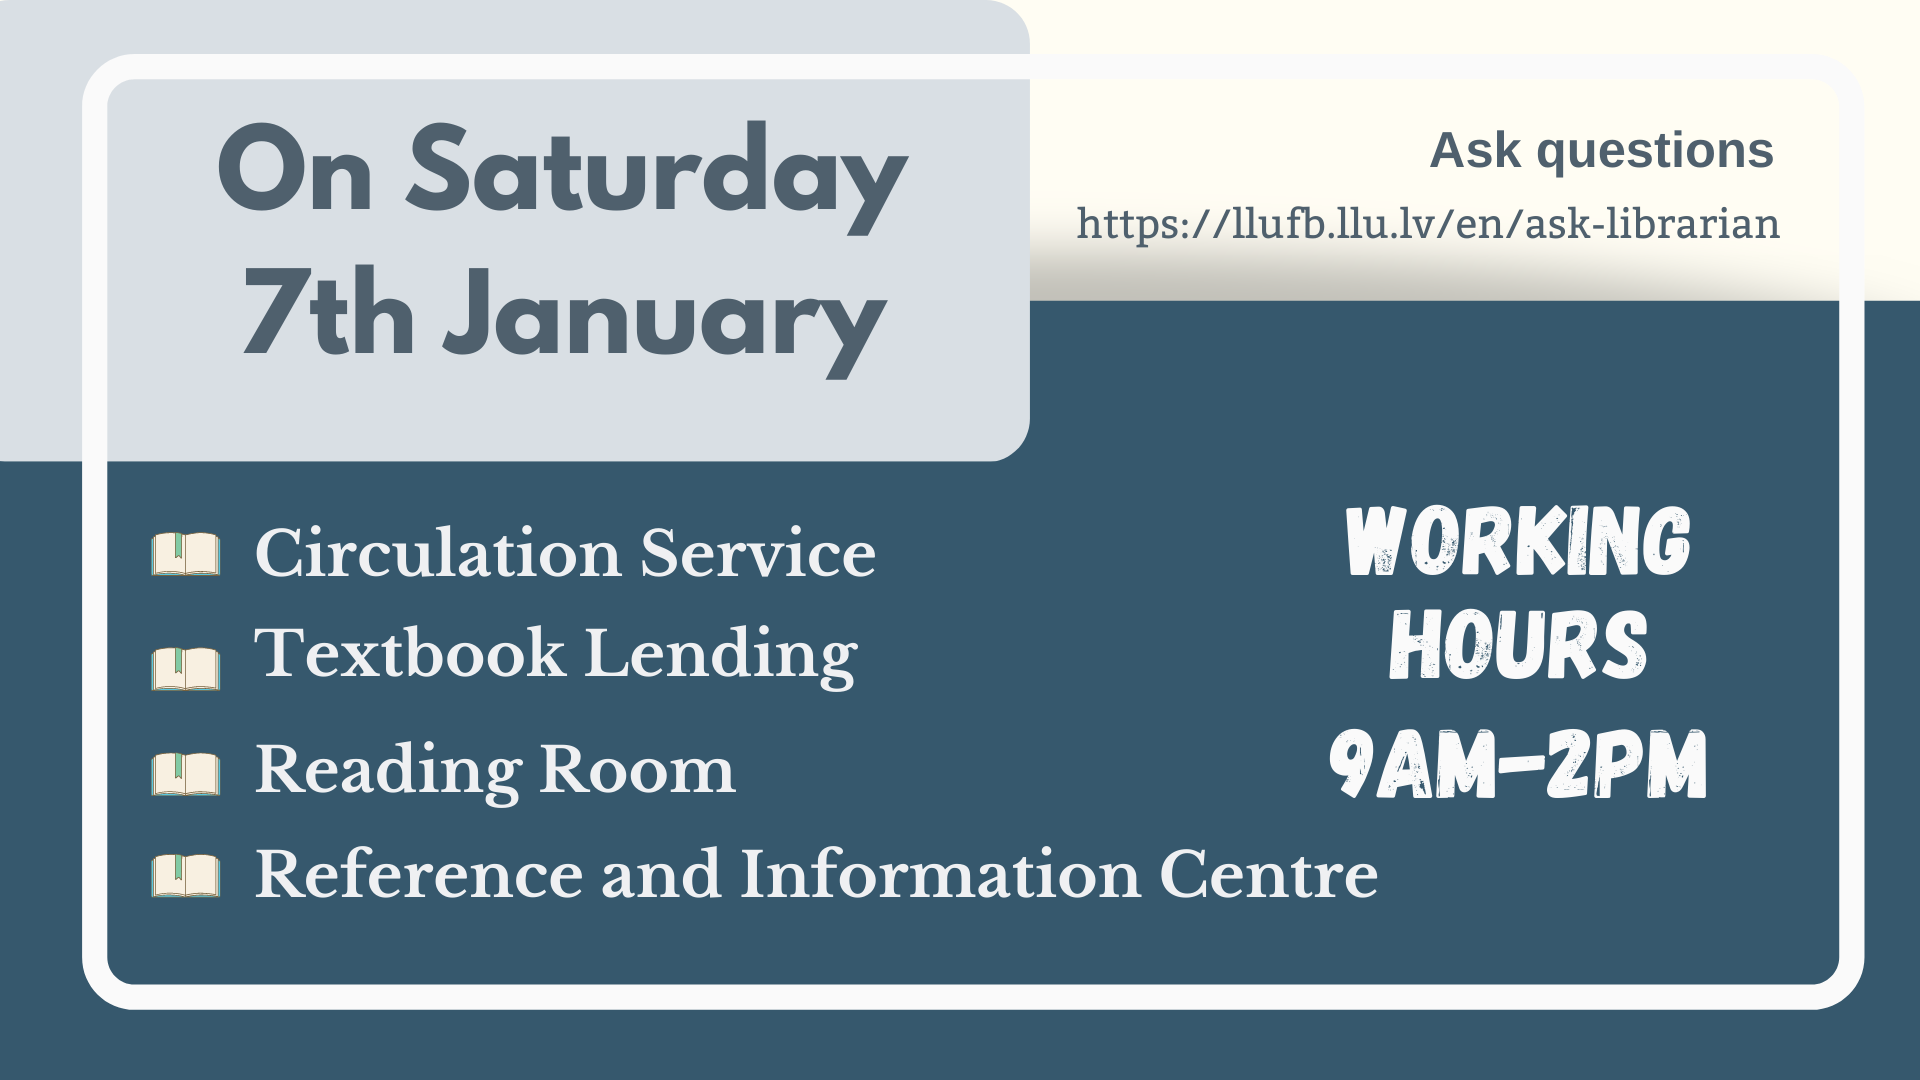 Library on Saturday 7 January working hours 9am-2pm